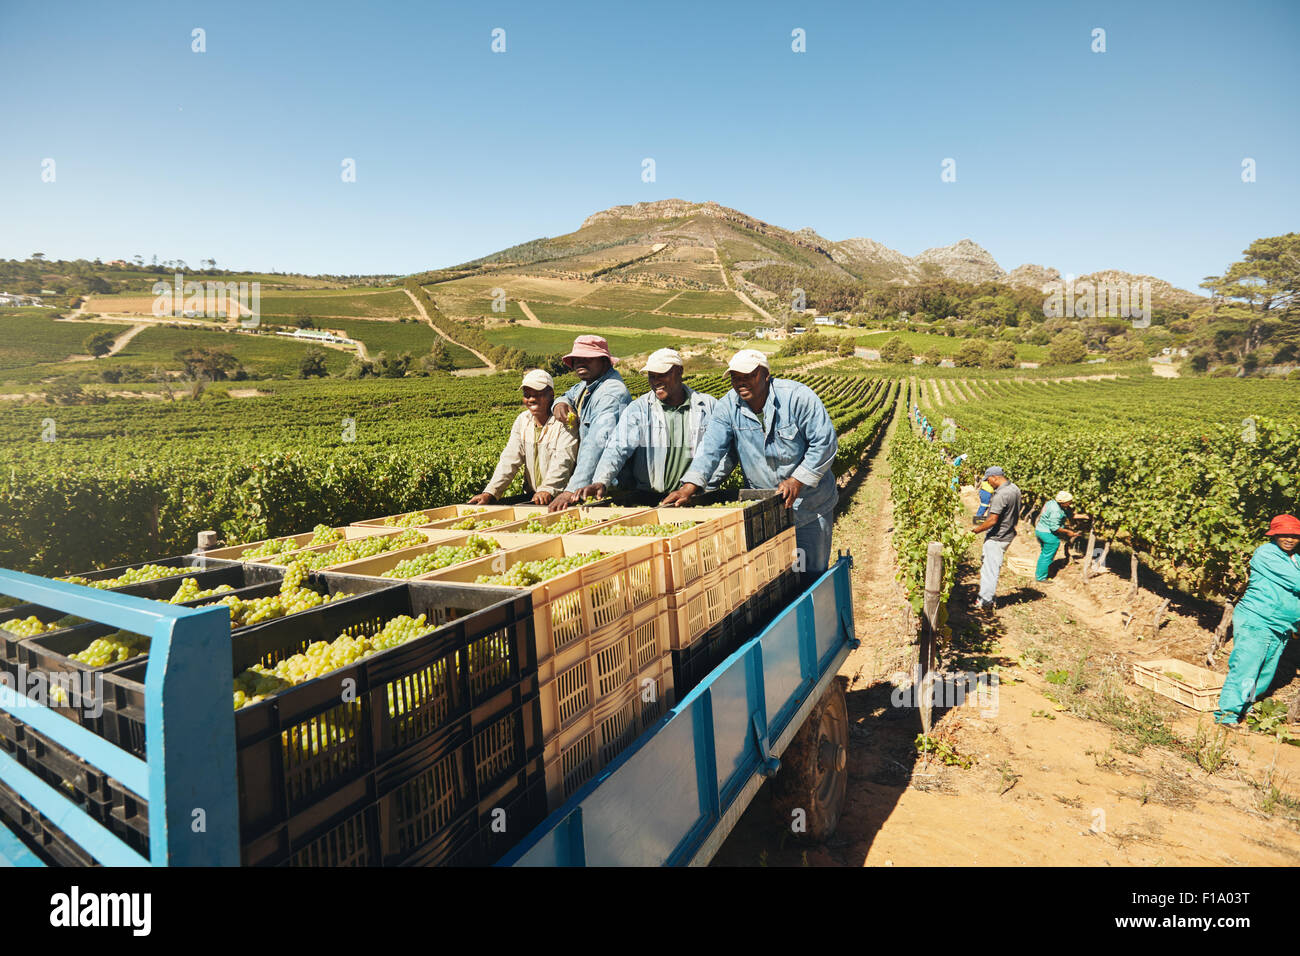 Workers loading boxes of grapes on a tractor trailer after harvesting. Grapes being delivered from the vineyard to wine manufact Stock Photo